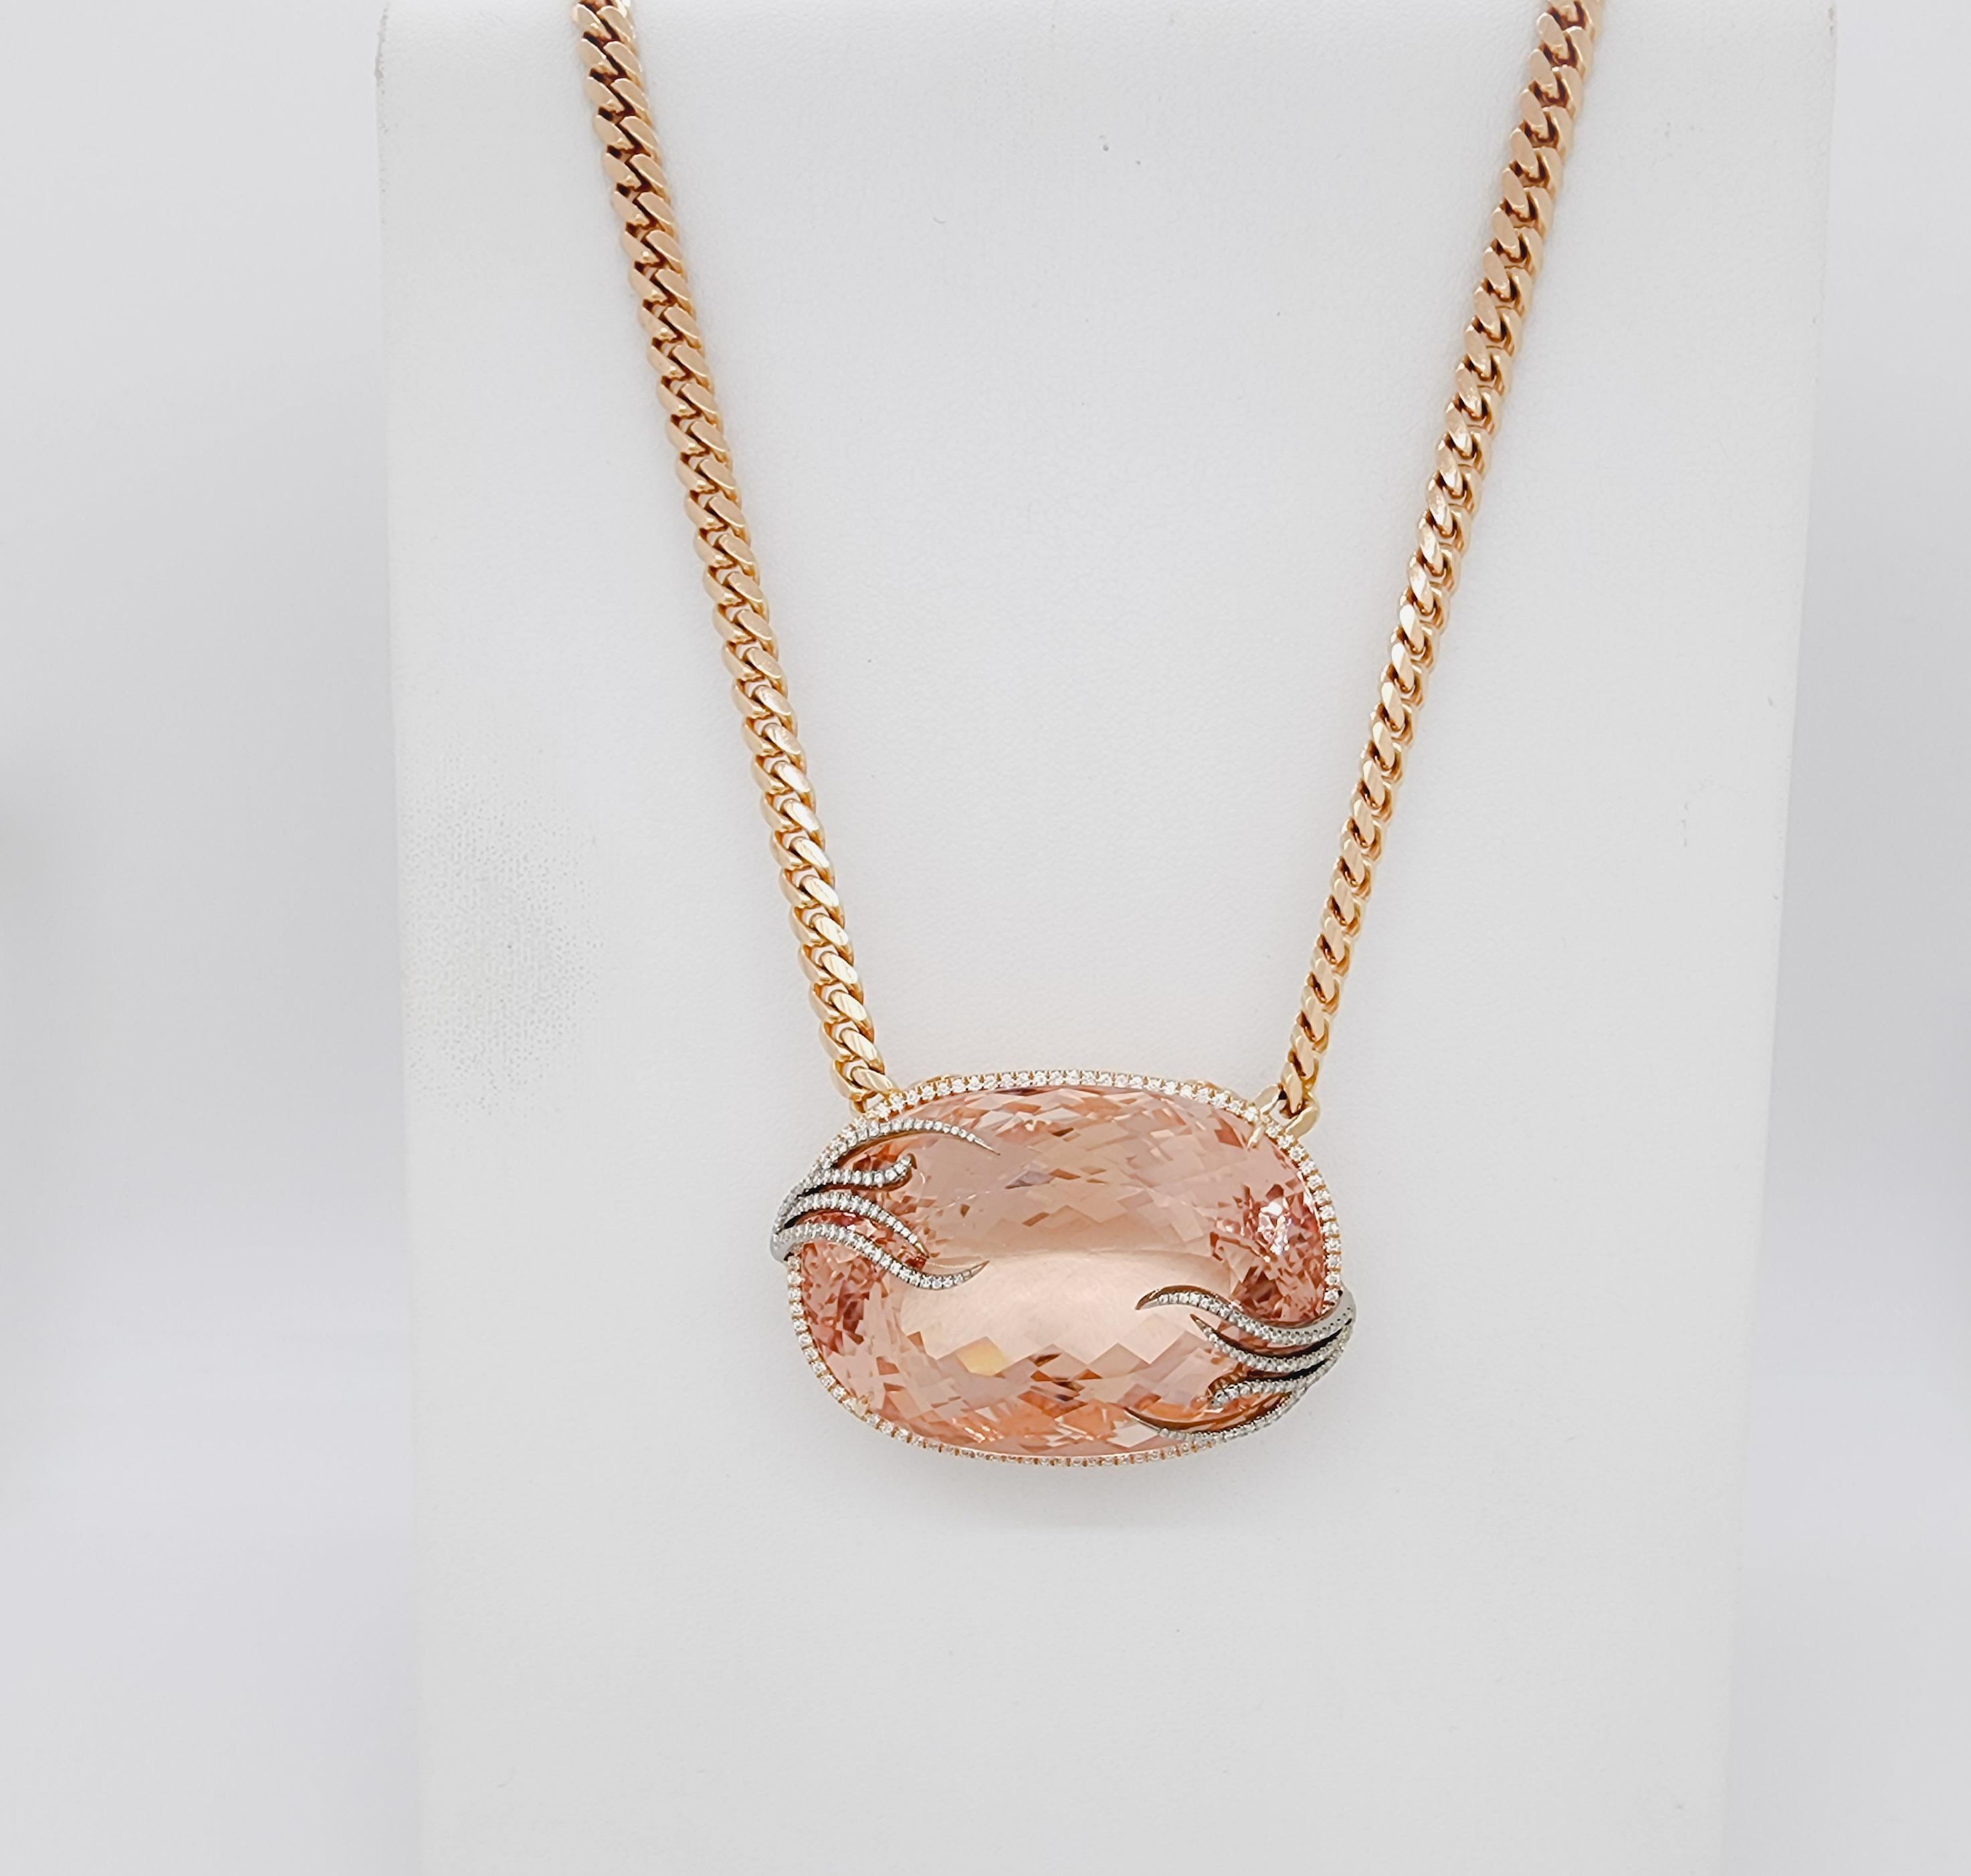 Absolutely gorgeous GIA 170.88 ct. orangy pink morganite oval with 1.00 ct. good quality white diamond rounds.  Handmade in 14k rose gold.  Length is 18